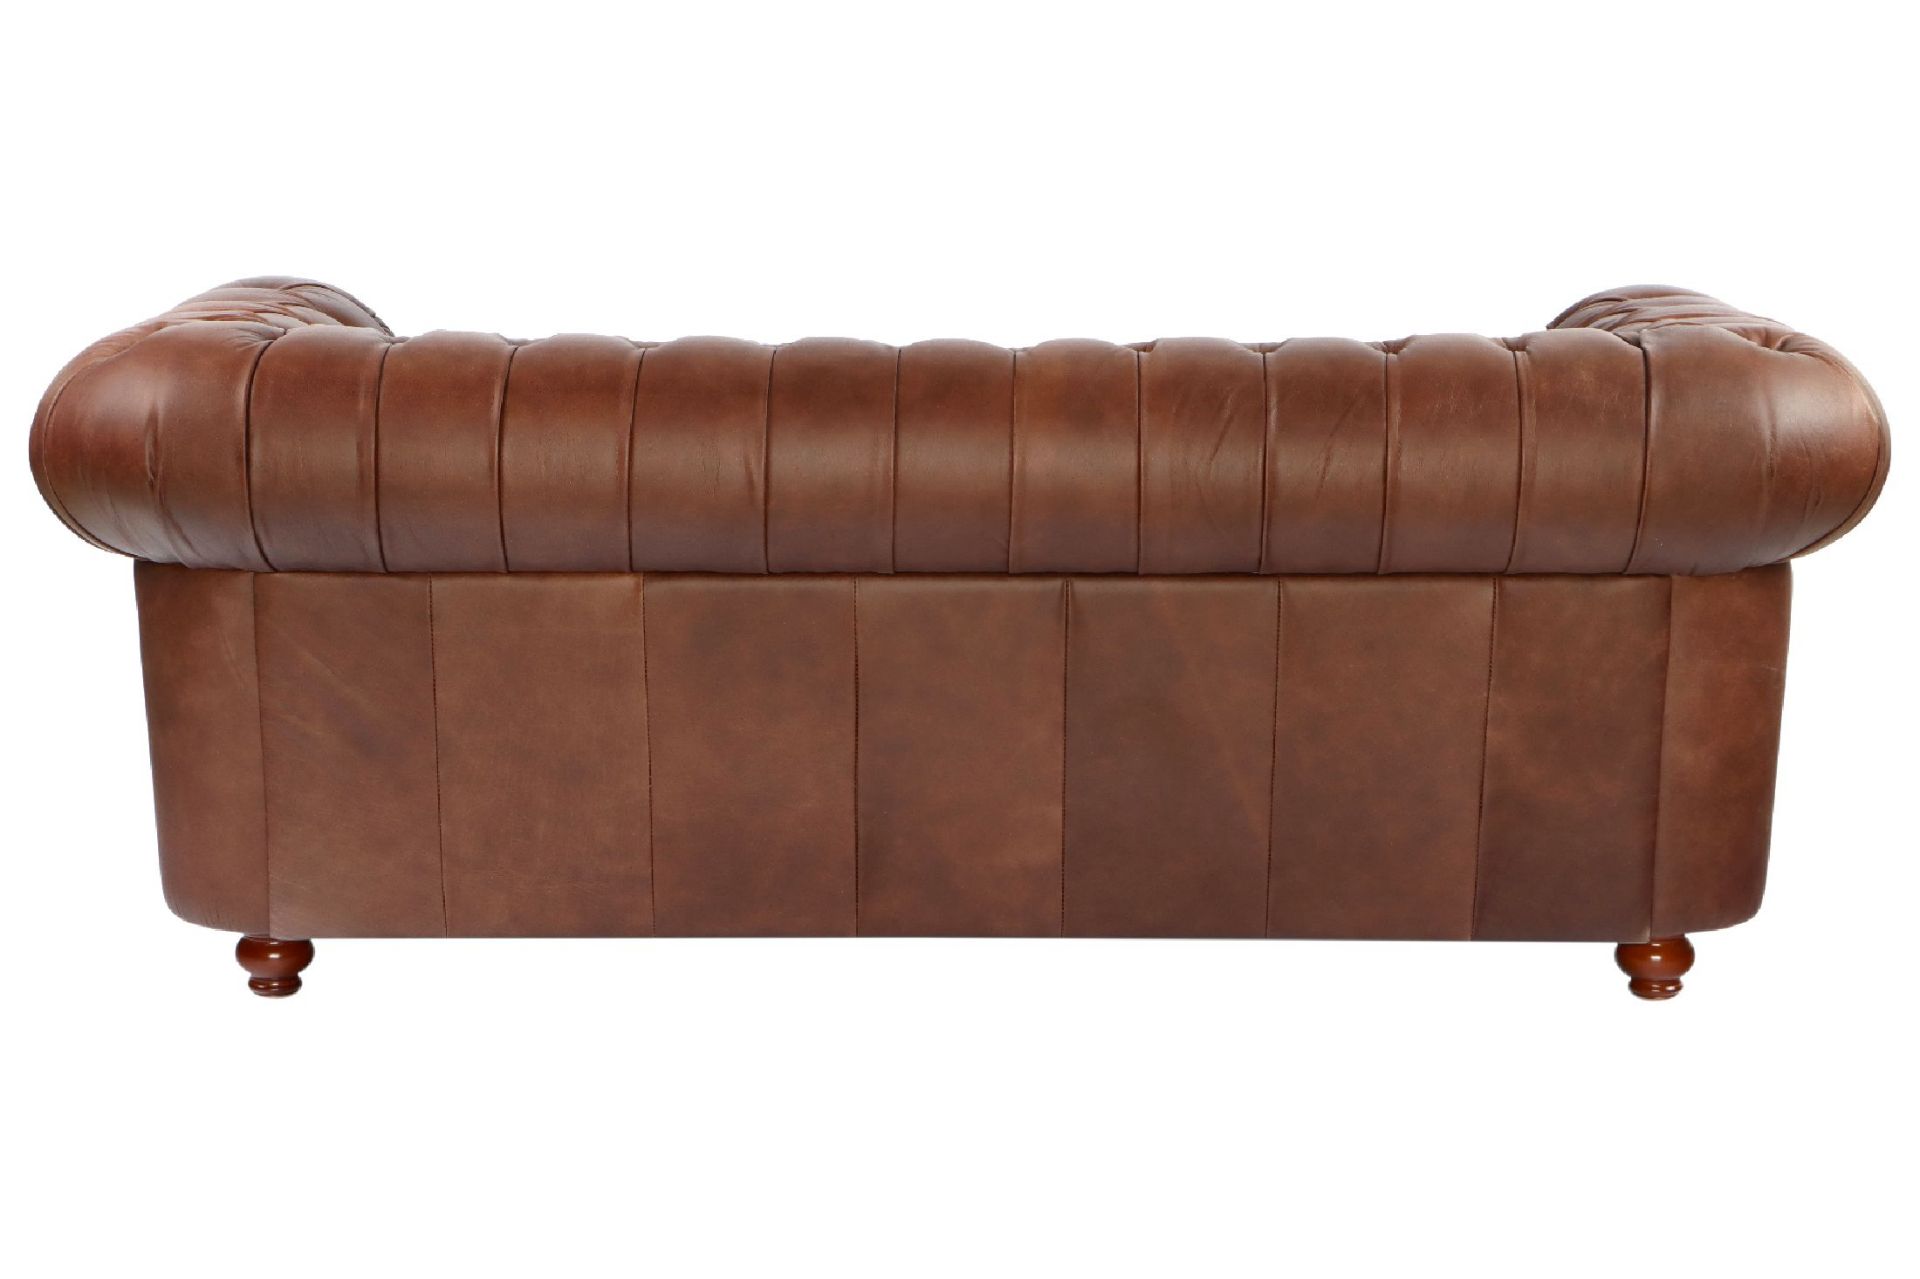 Chesterfieldsofa,  2-Sitzer, braune Lederbezüge, Rücken, - Bild 2 aus 2